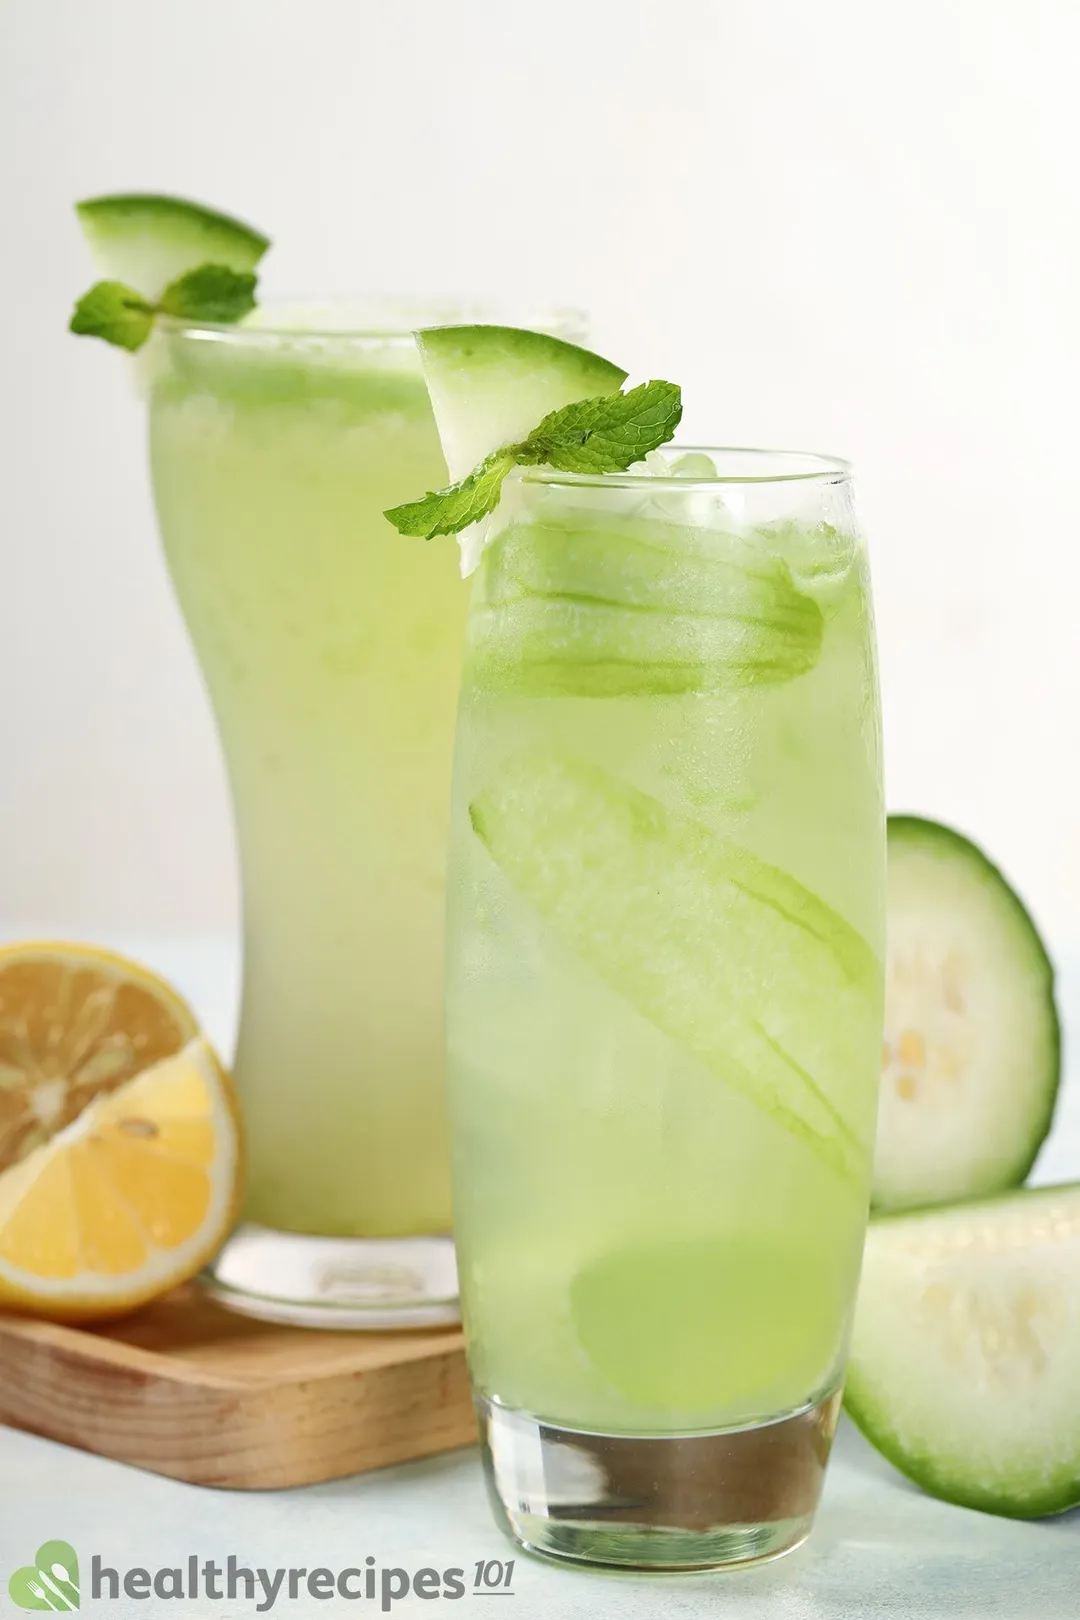 Two tall glasses of winter melon juice, one of which is placed on a wooden board near lime wedges and slices of winter melon.